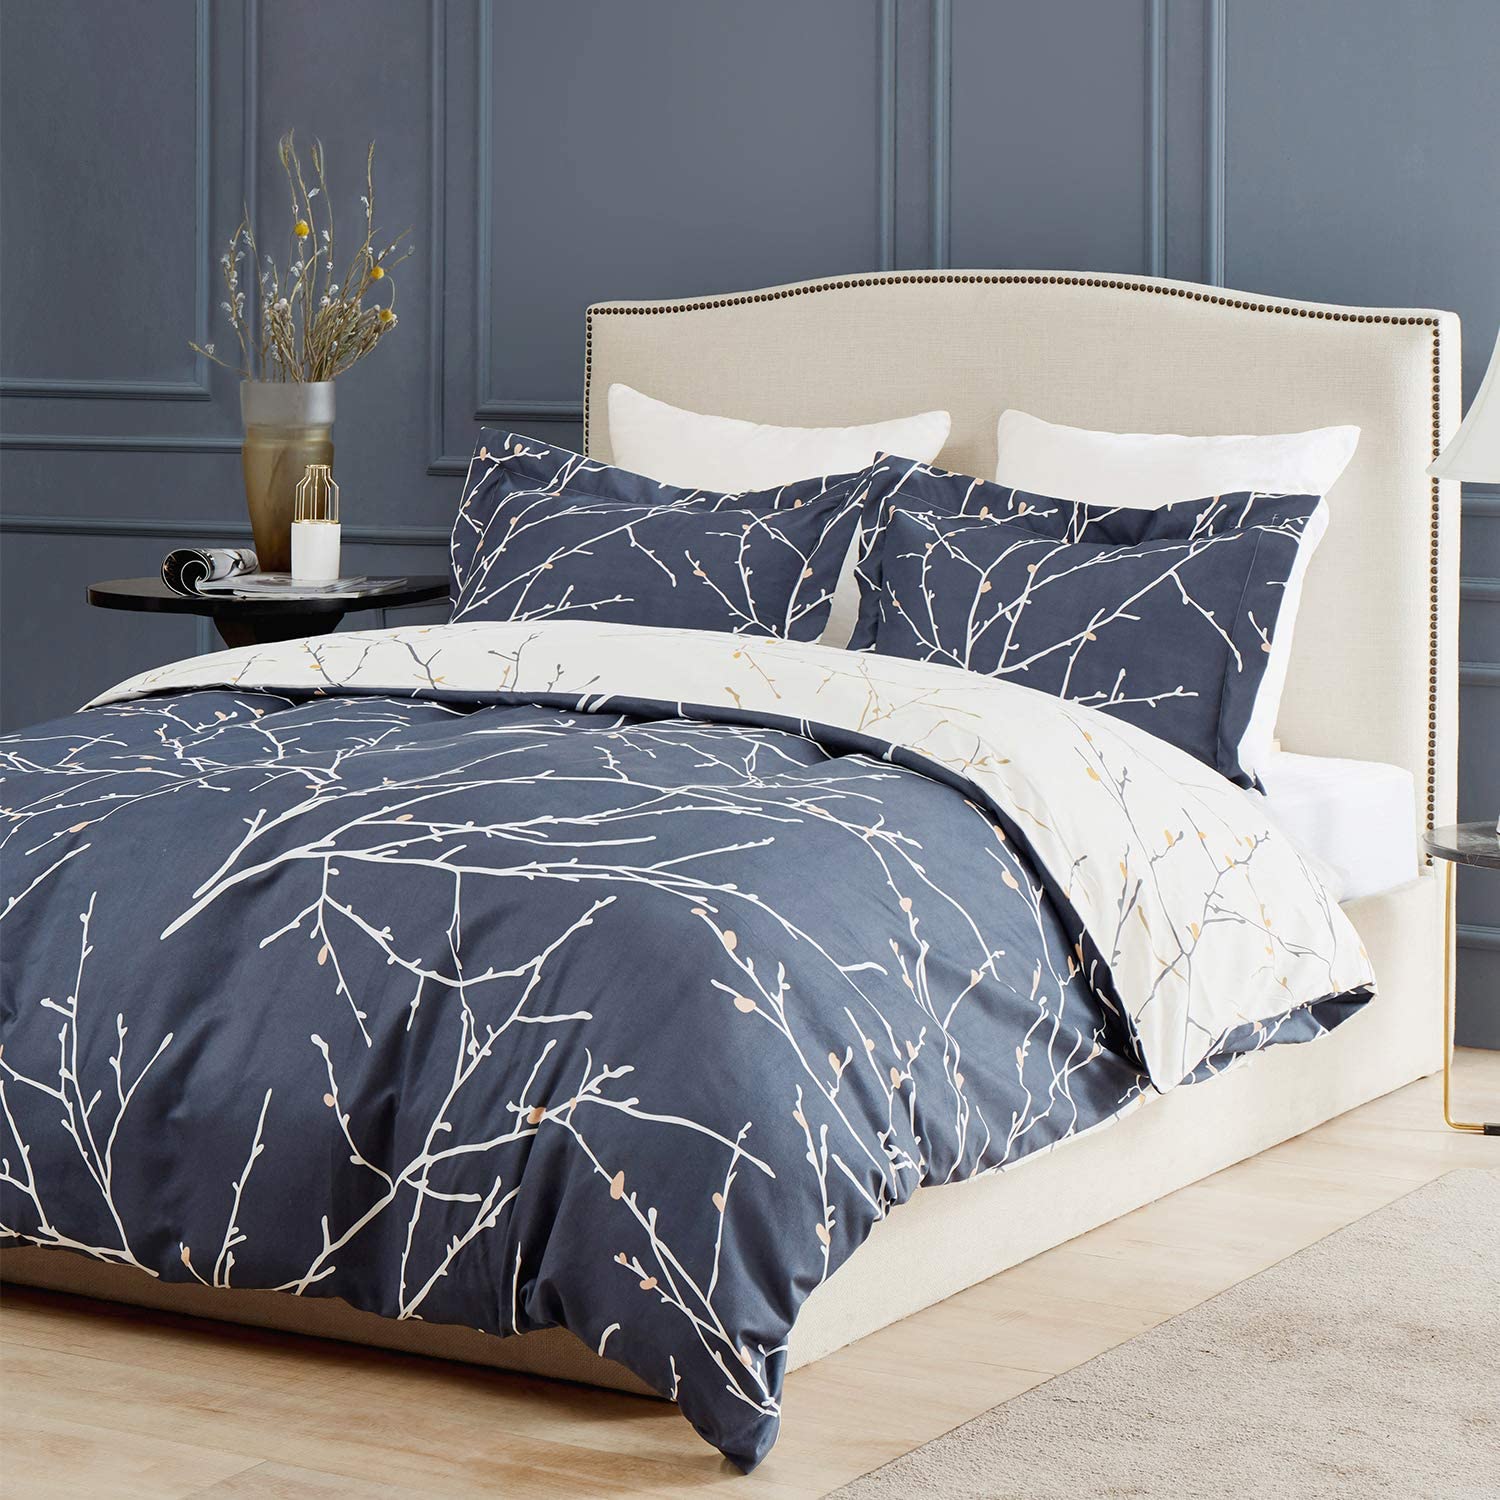 Duvet Cover Branch Twigs Printed Pattern Comforter Cover with Zipper Closure Supersoft Microfiber